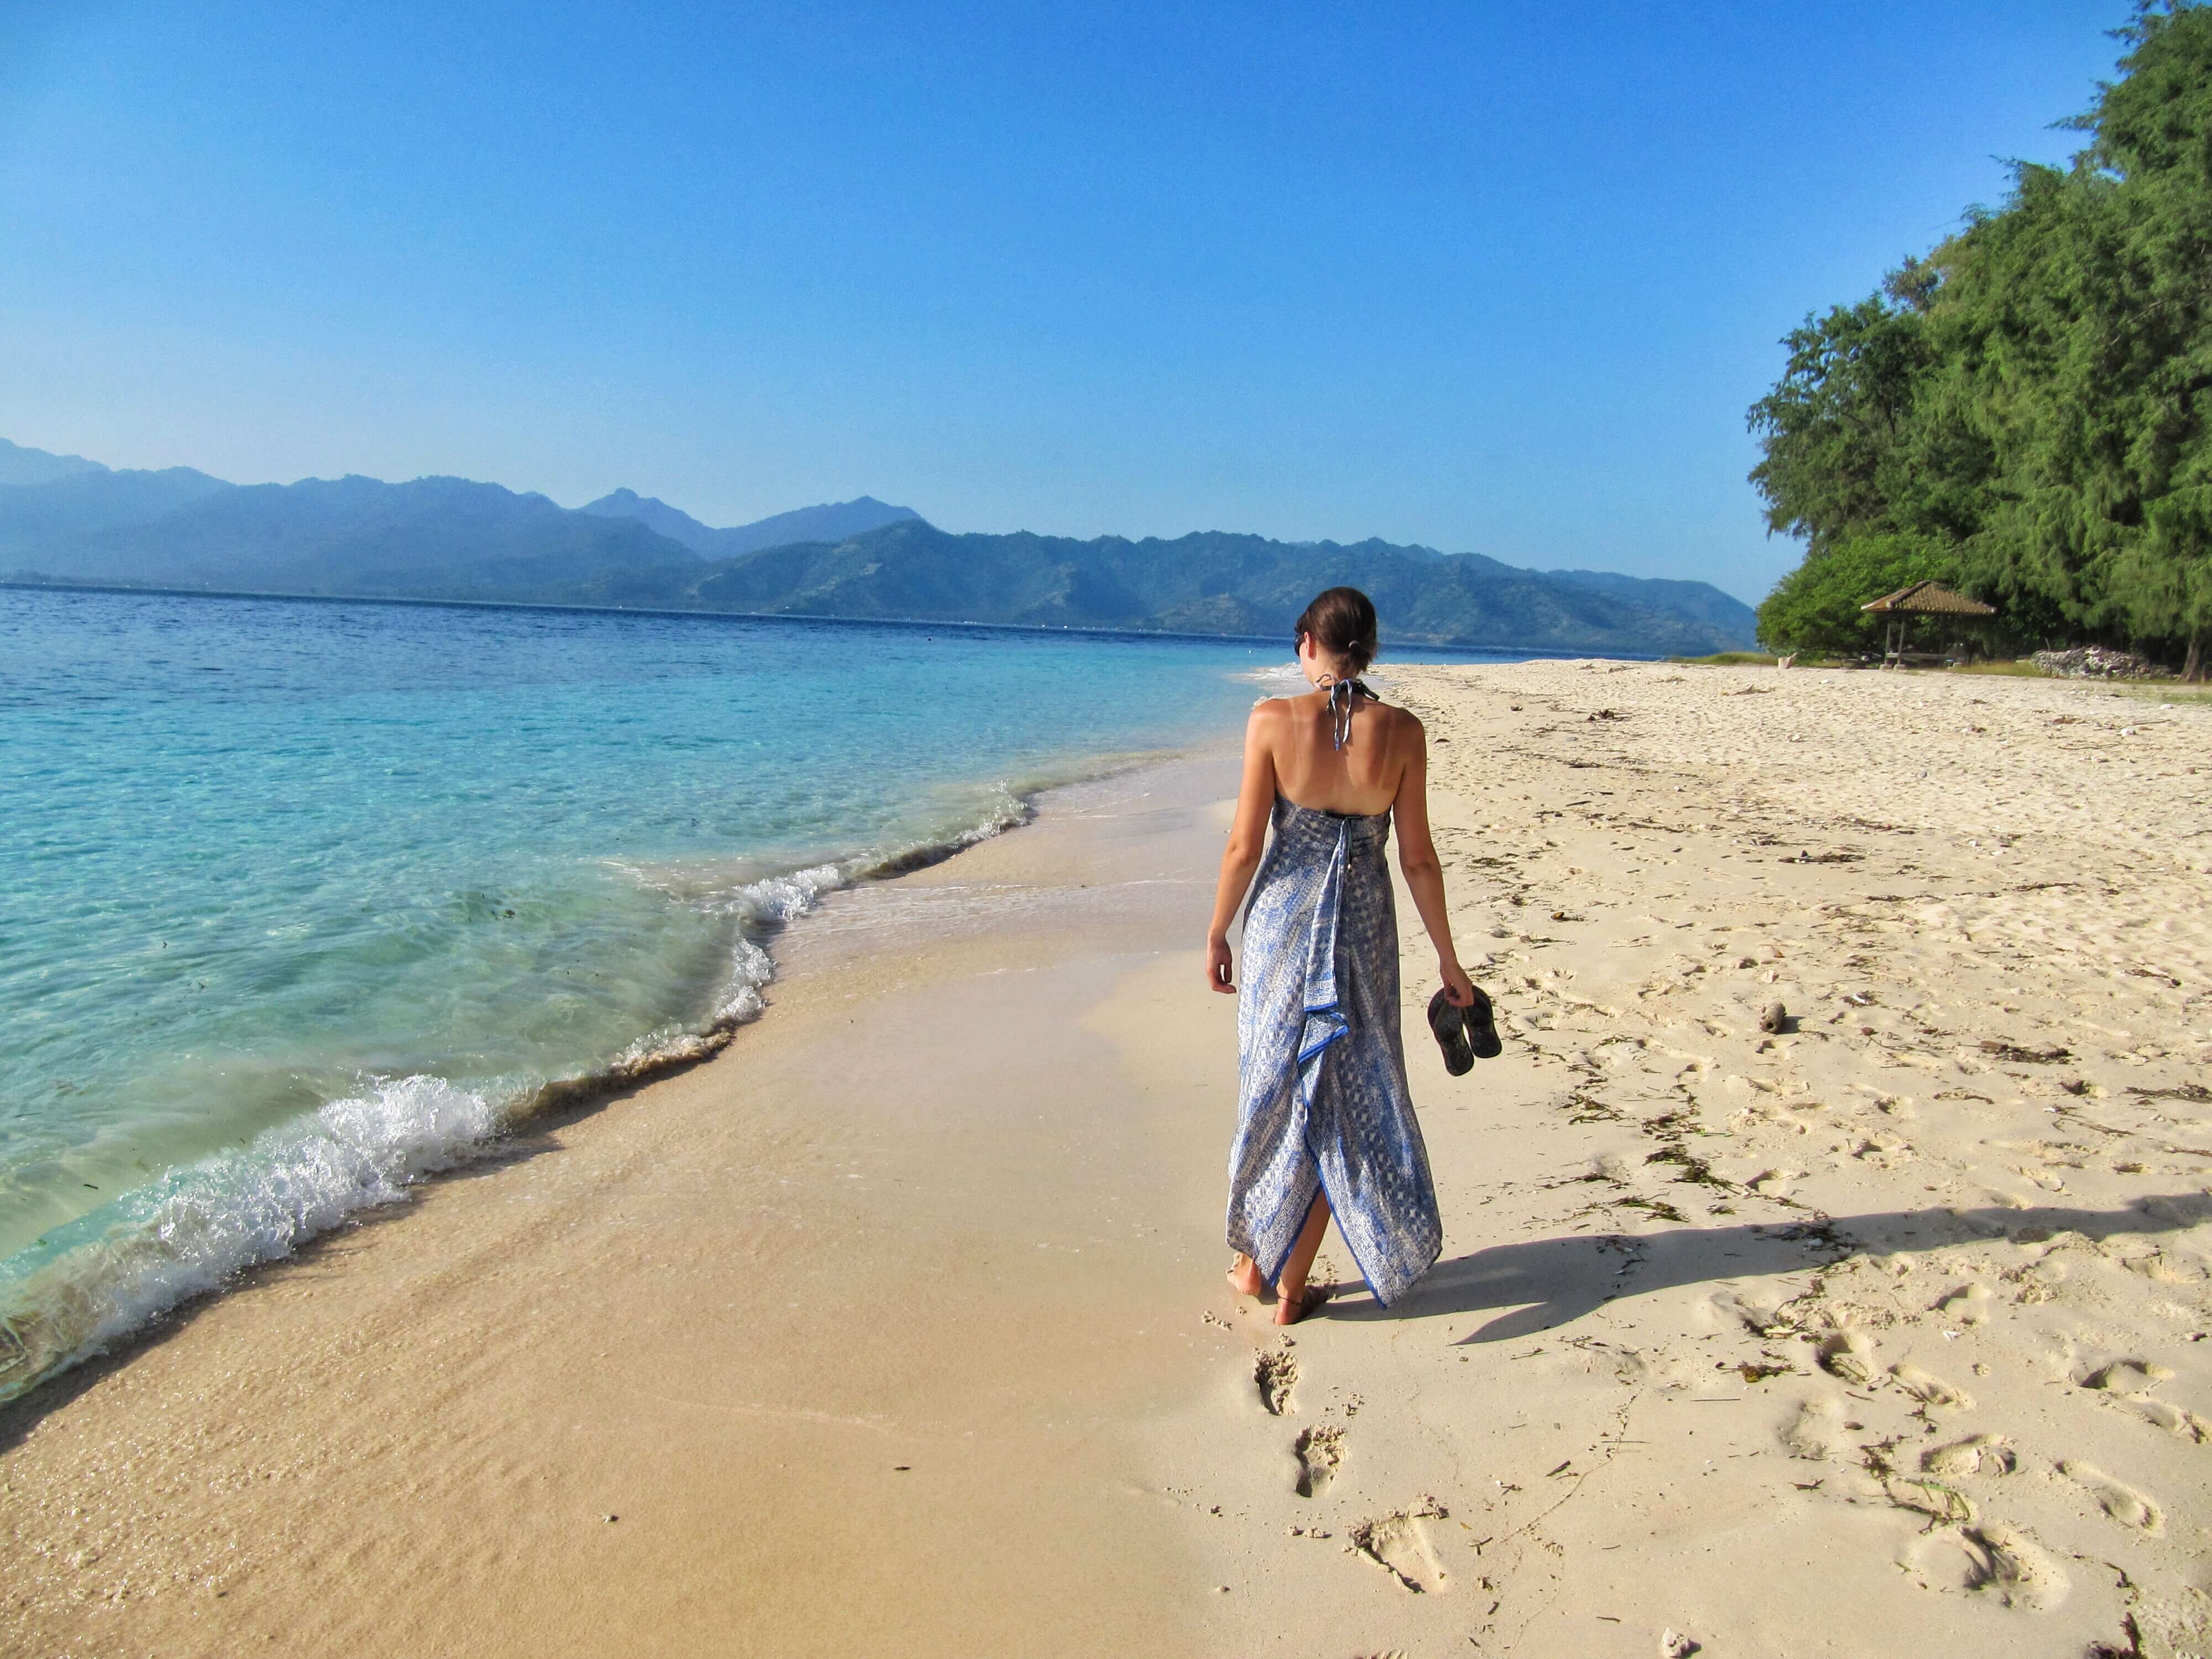 Gili Meno, the beaches are quiet and beautiful. A more low-key island in Indonesia's Gilis.